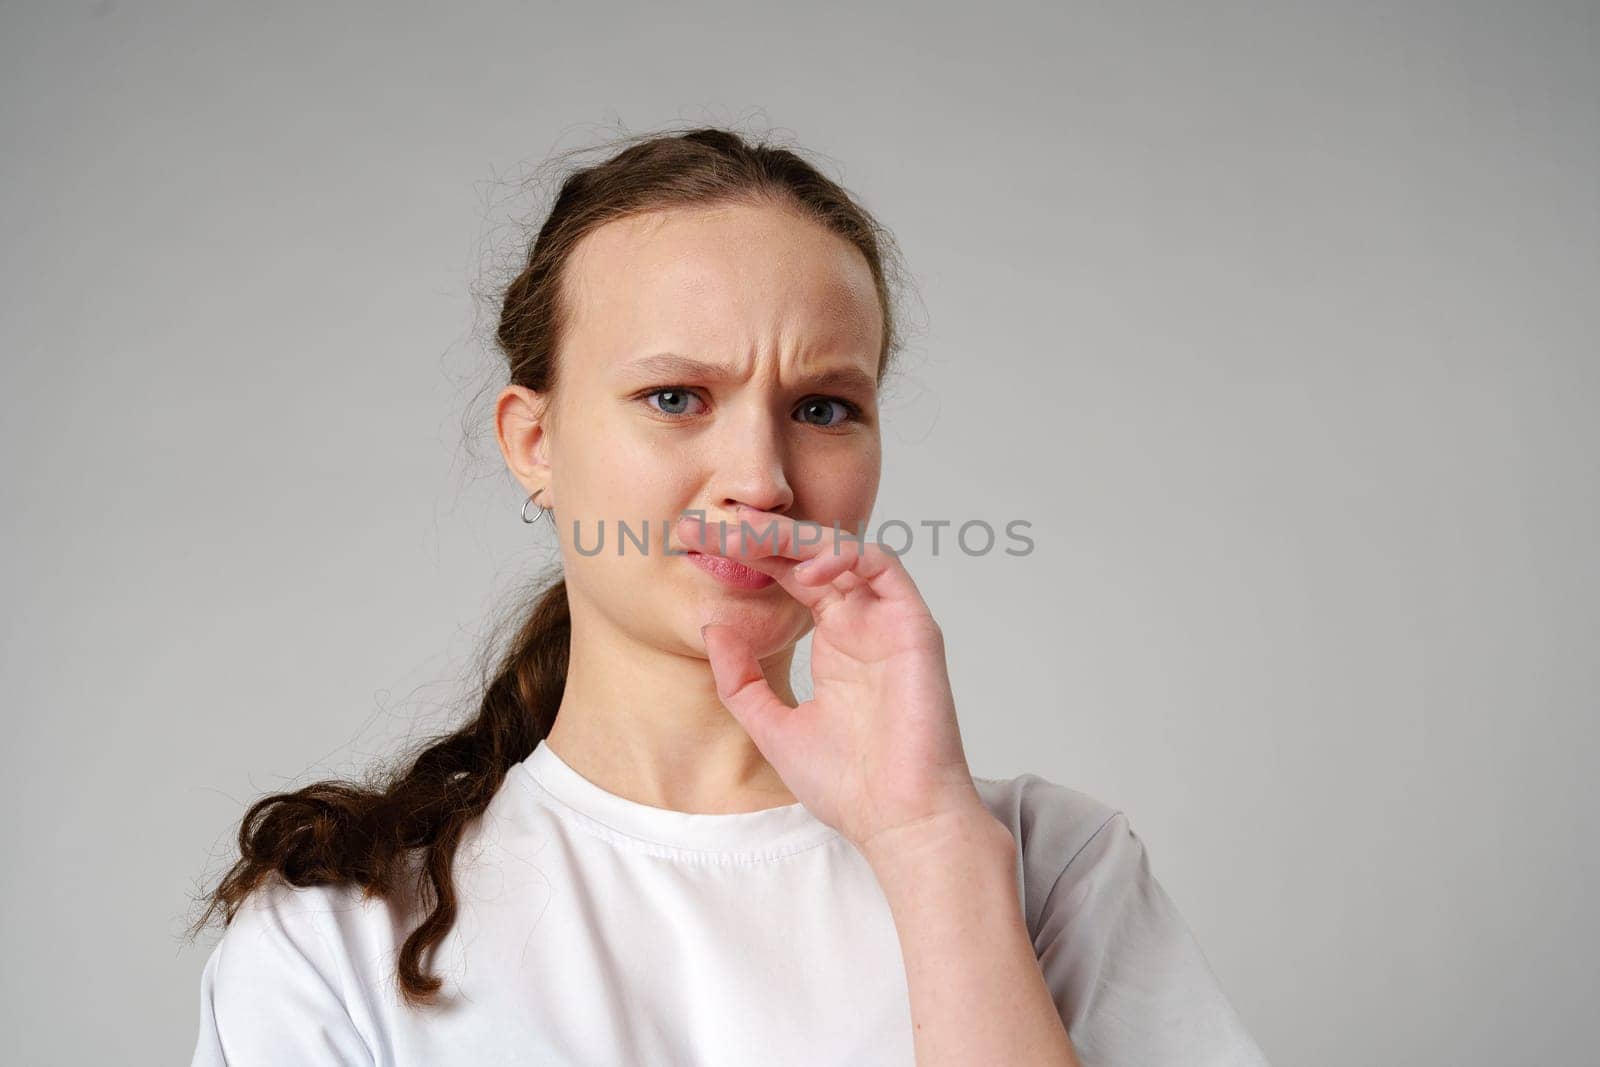 Young Woman Making Funny Face With Her Fingers on gray background by Fabrikasimf